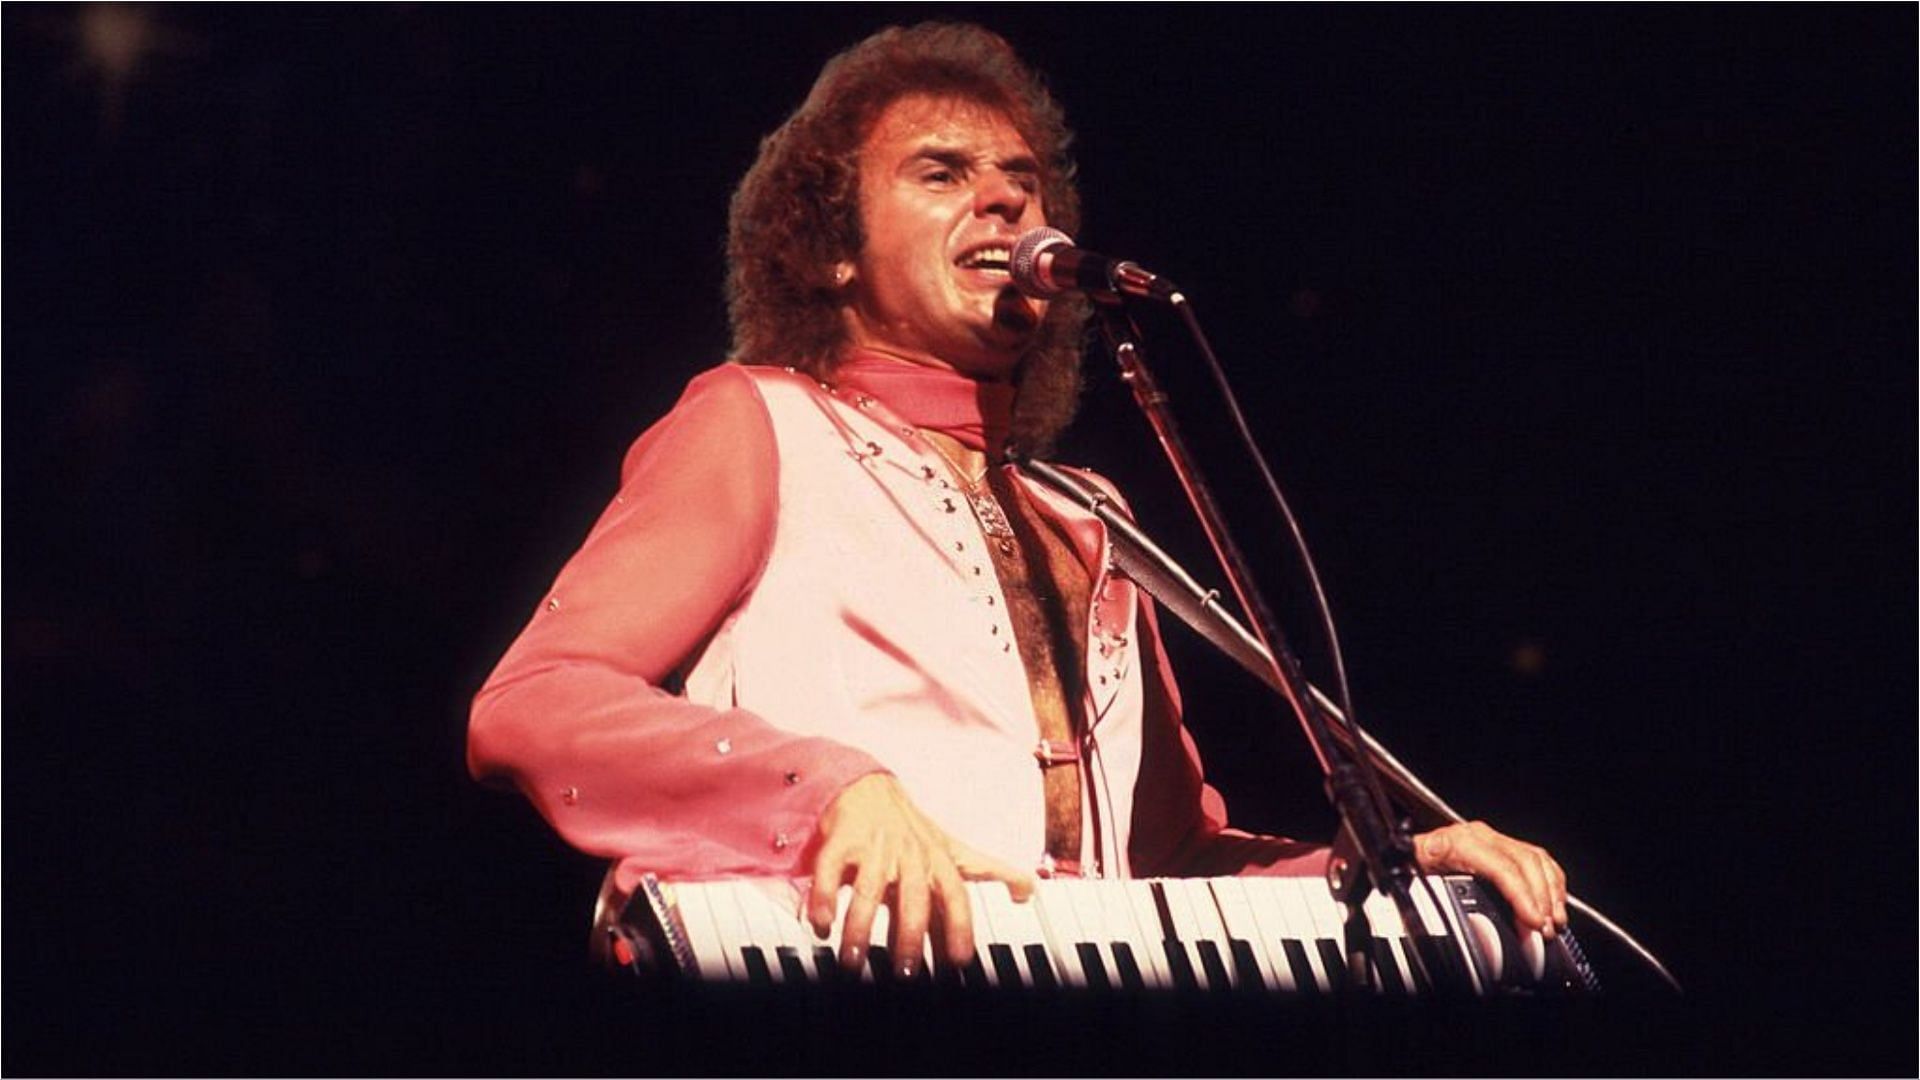 Gary Wright has earned a lot from his successful career as a singer (Image via Paul Natkin/Getty Images)